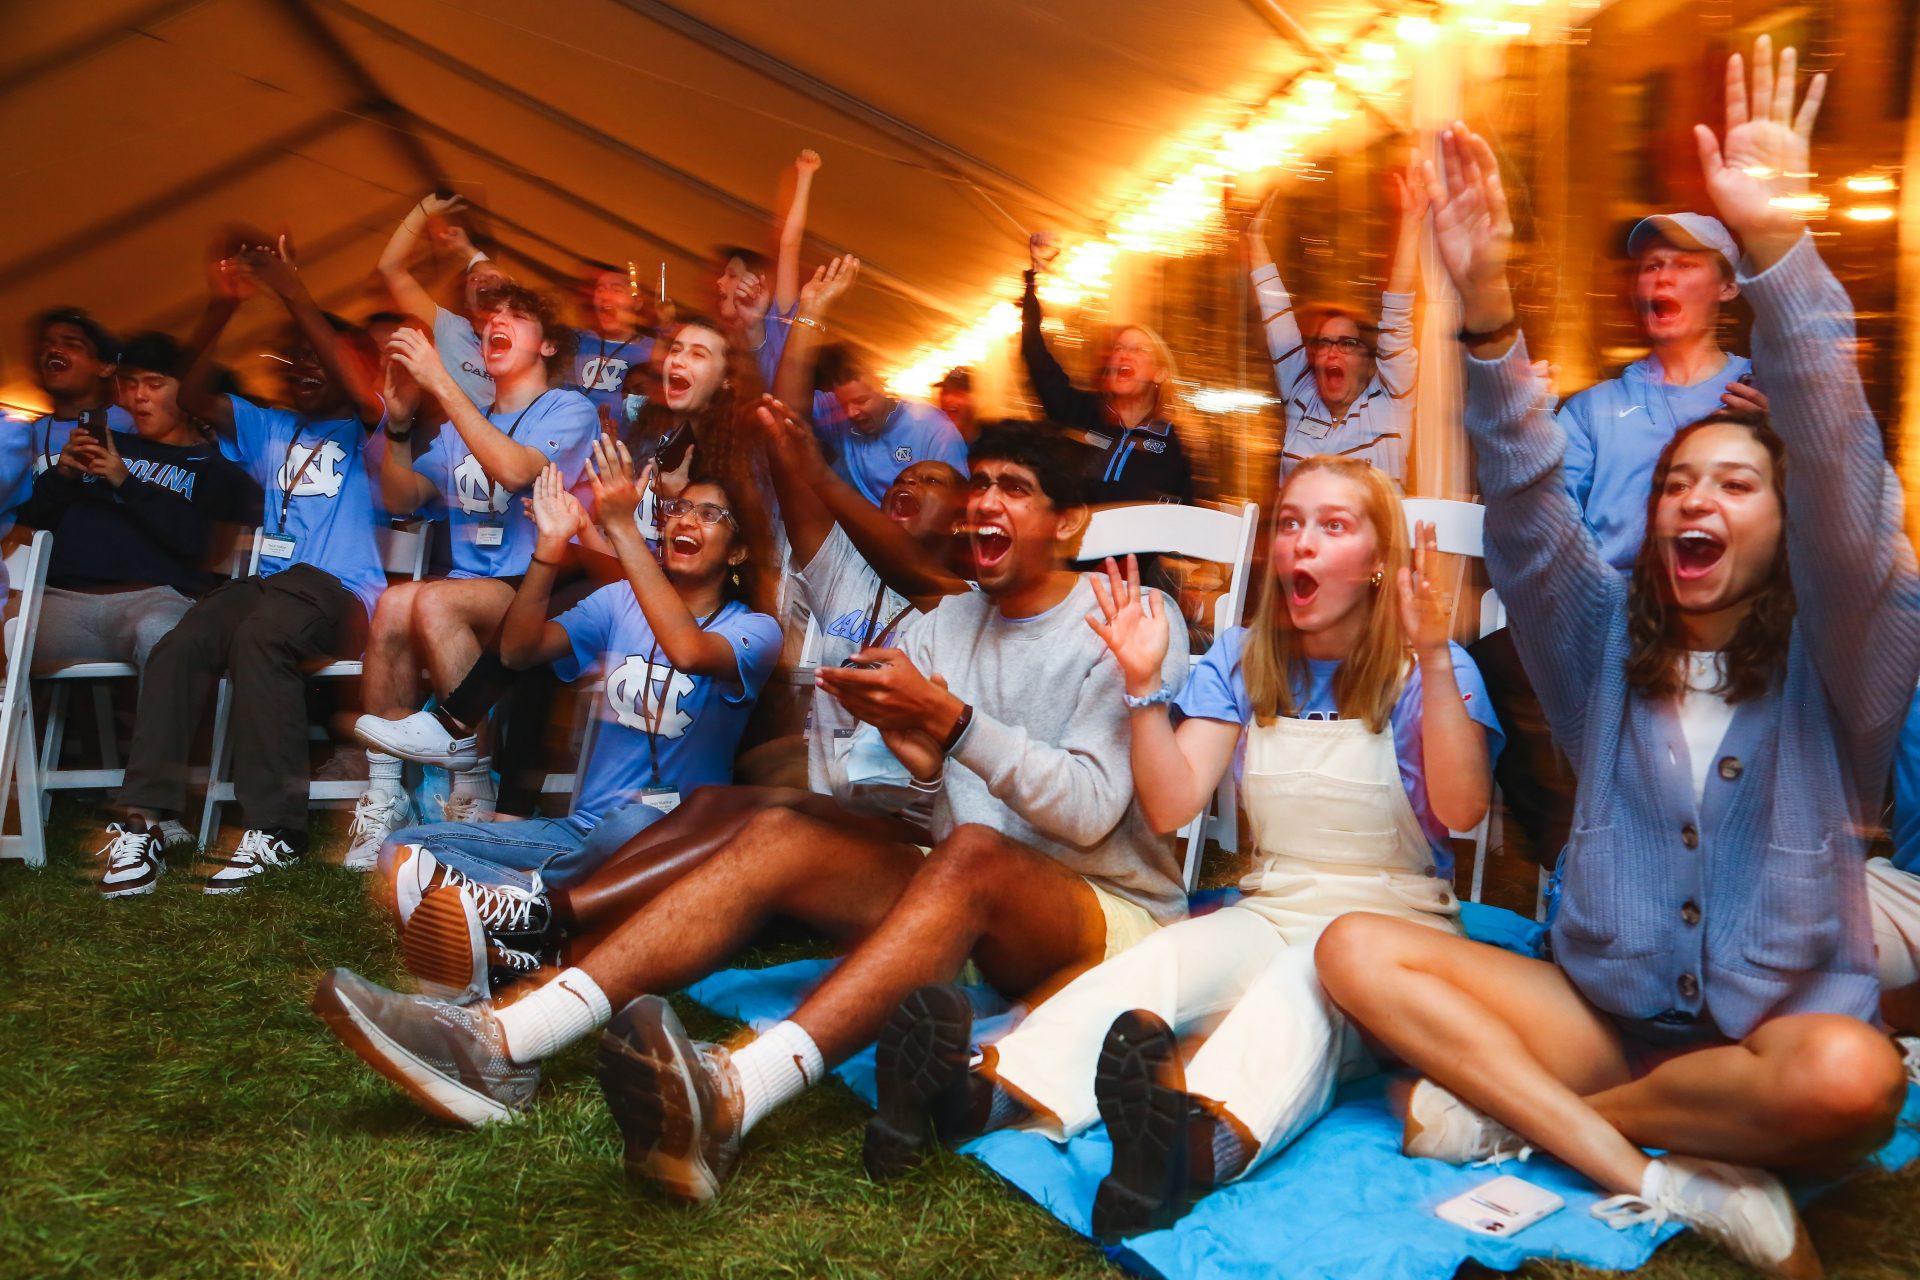 A group of students sitting on the grass cheer on the Tar Heels on television.